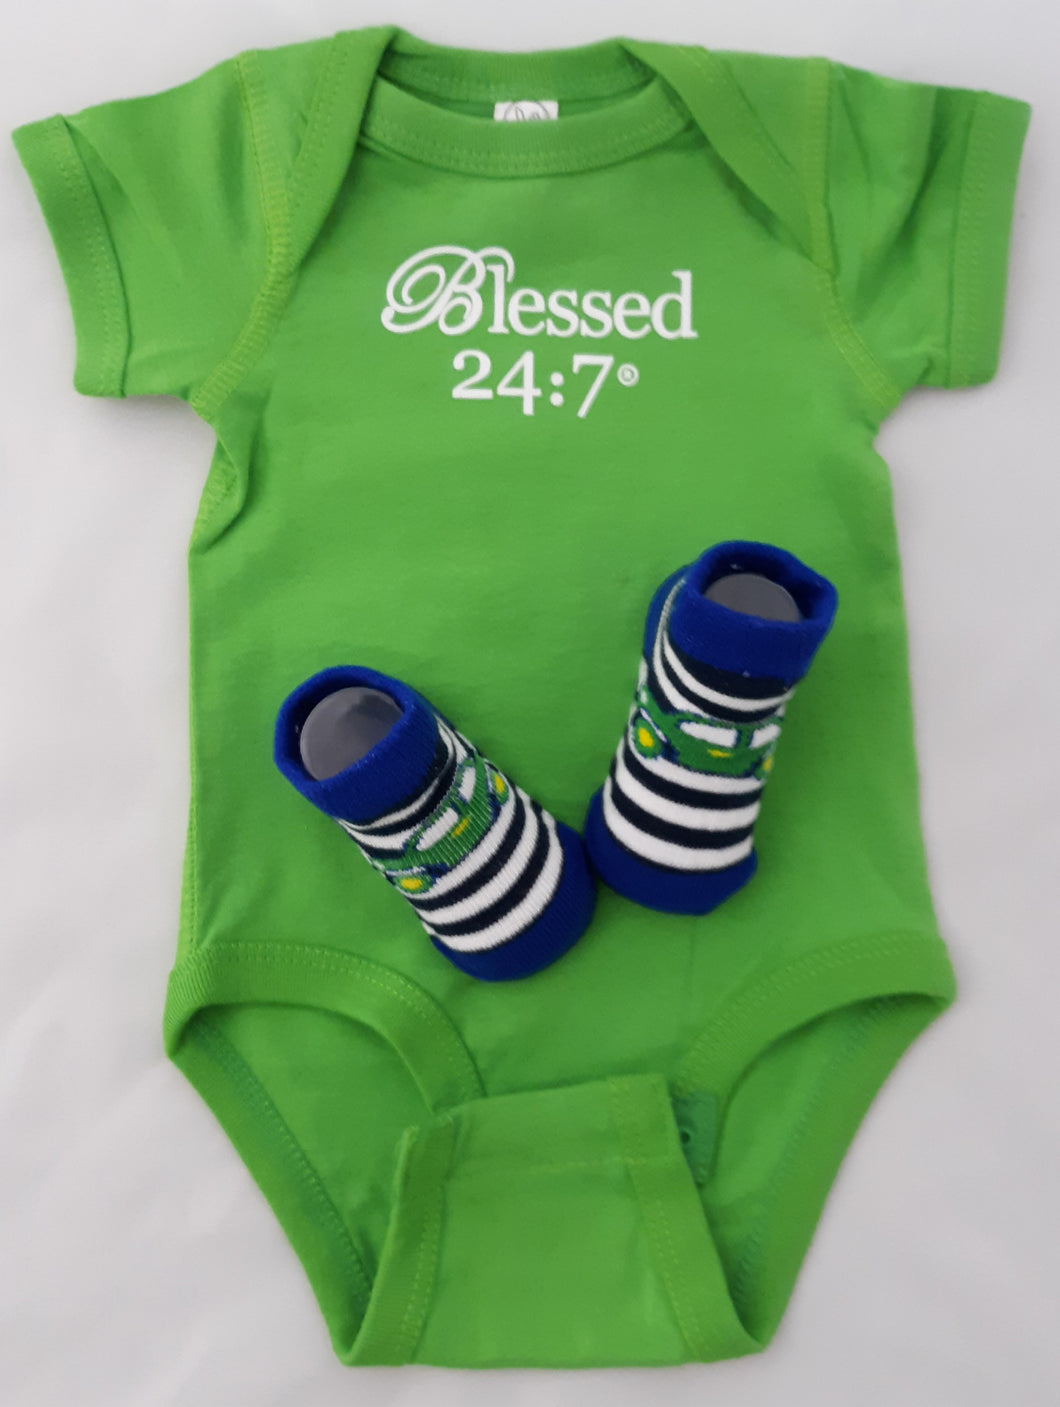 Blessed 24:7 Baby Onesie & Baby Socks Green Set FREE SHIPPING